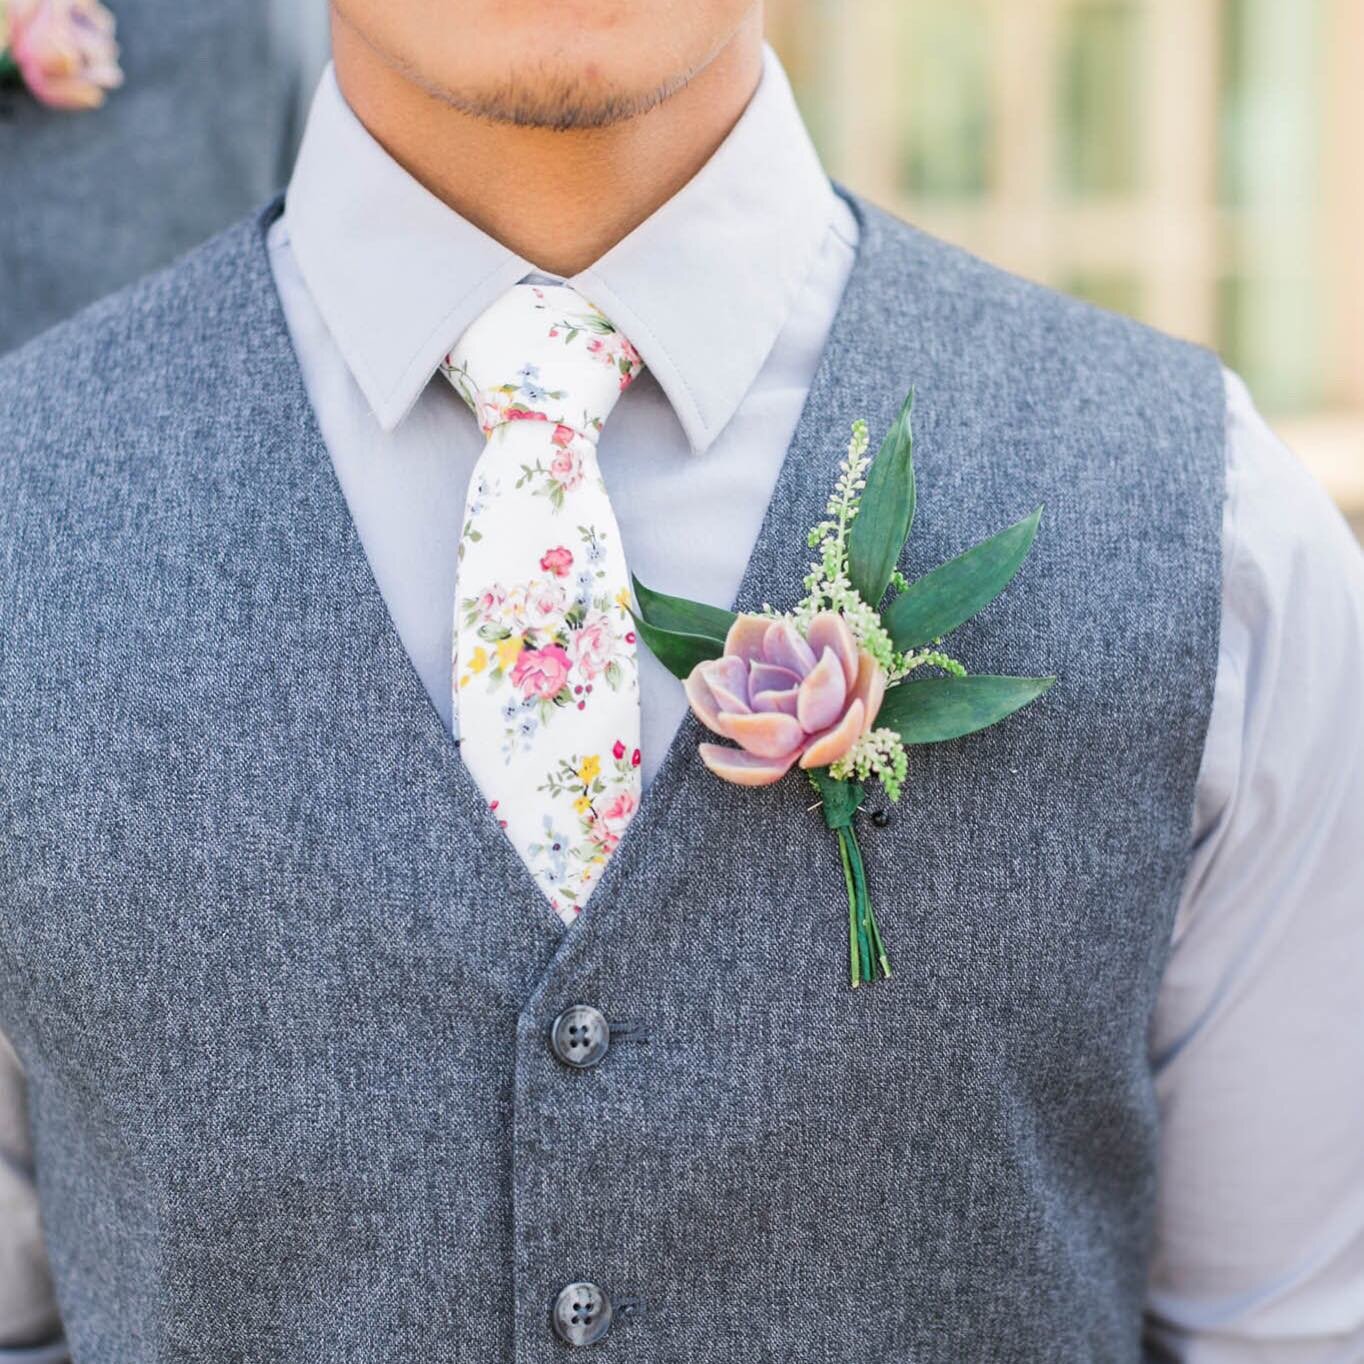 Succulents make such great boutonni&egrave;res! Especially next to these fun floral ties! 
.
.
.
#dfwflorist #dfwweddings #dfwbride #dallasbride #fortworthbride #fortworthwedding